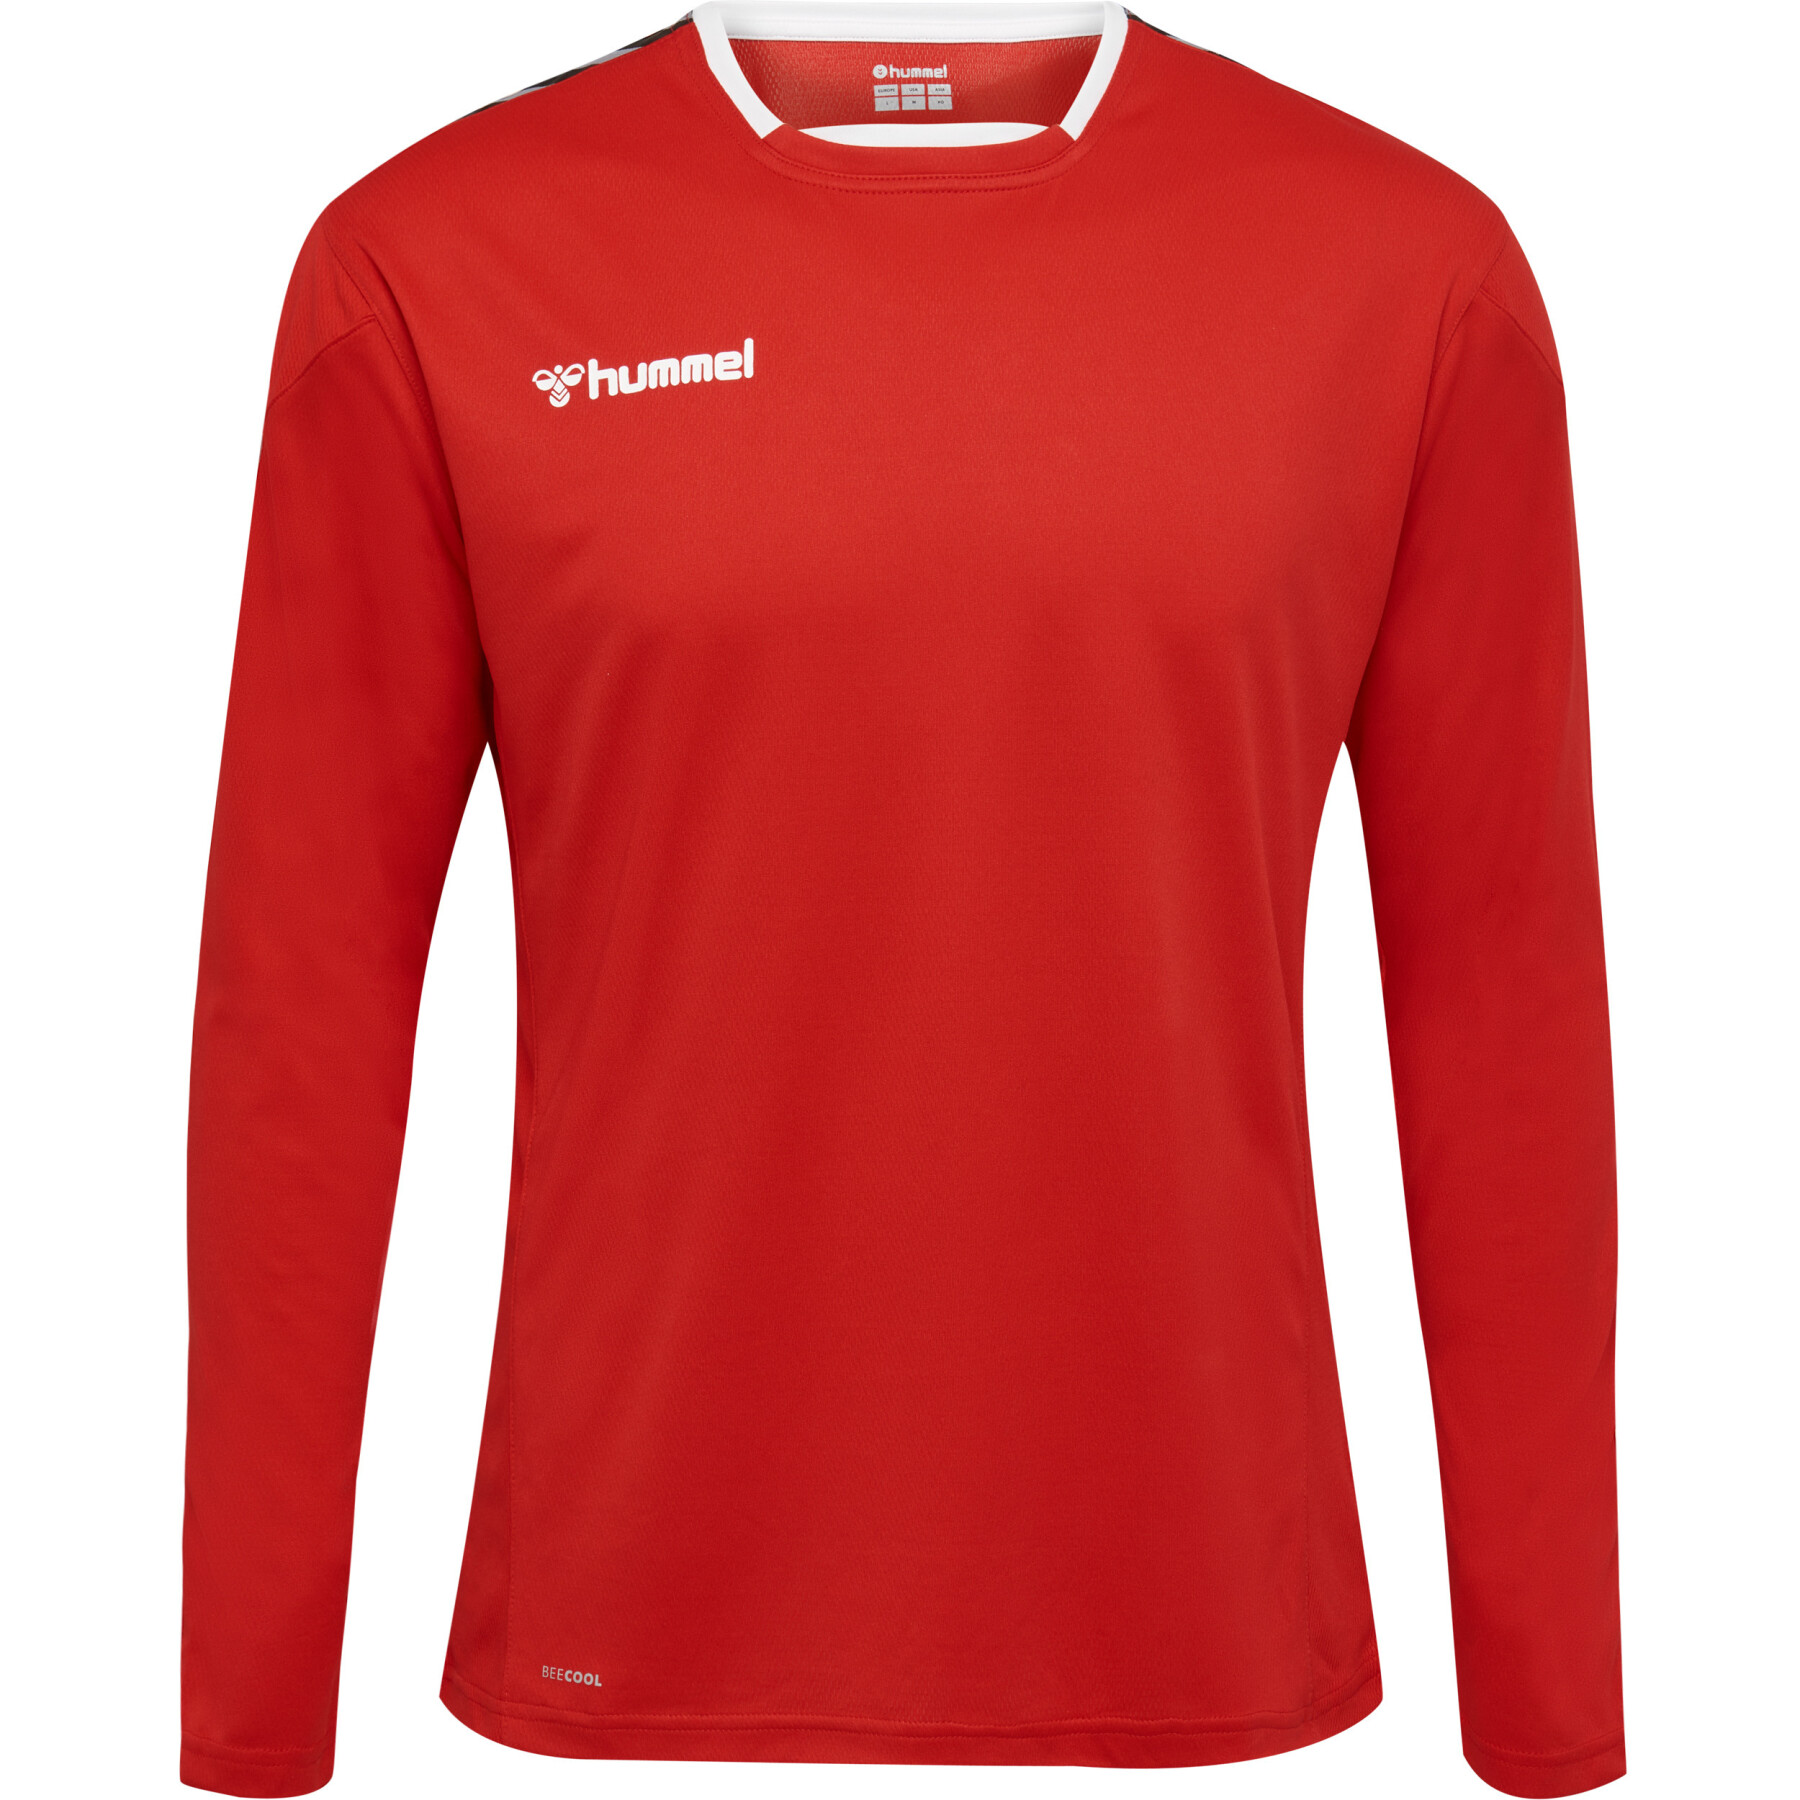 Trikot Hummel manches longues hmlAUTHENTIC Poly